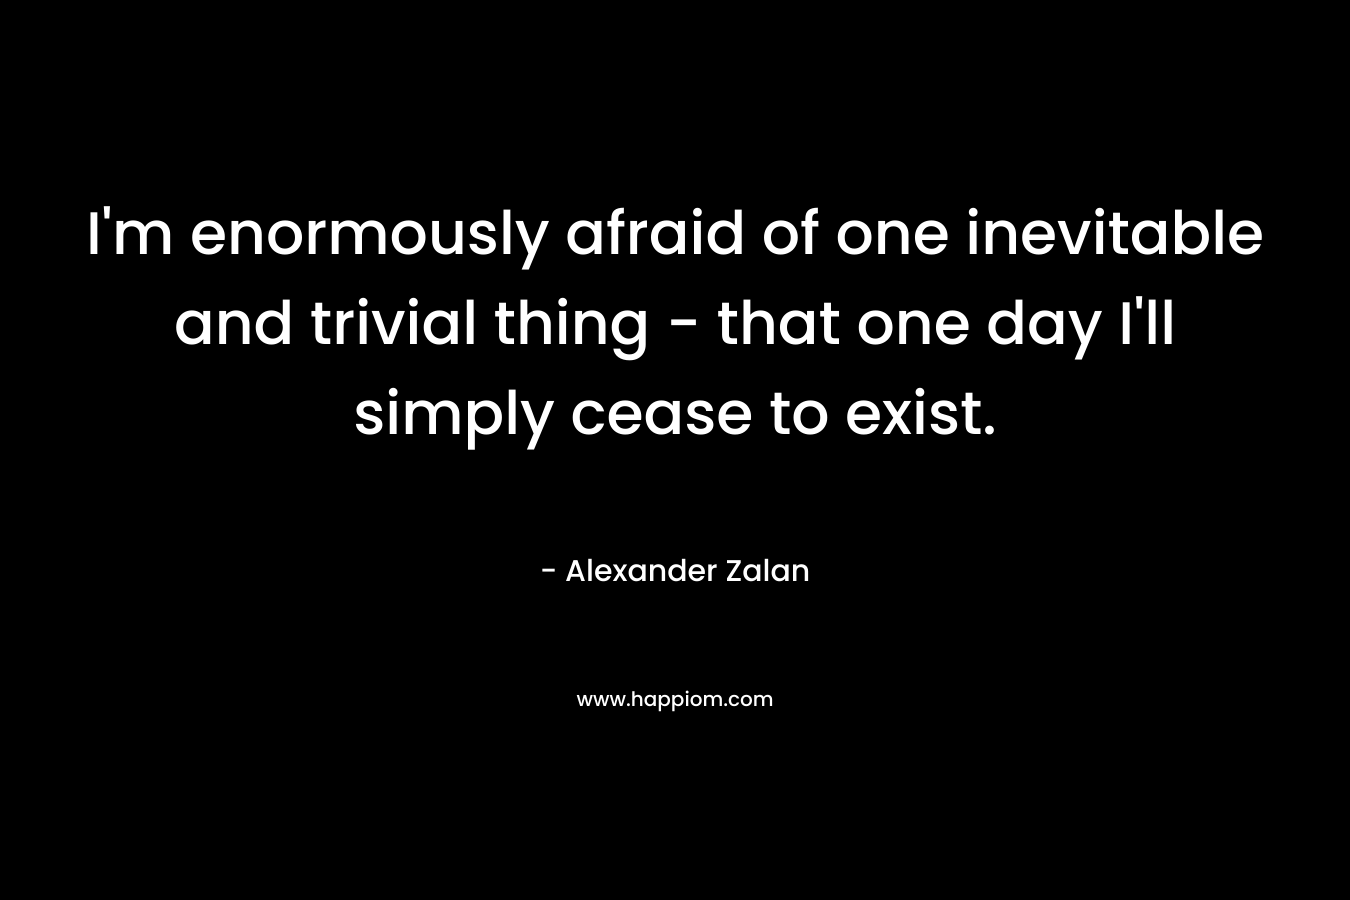 I'm enormously afraid of one inevitable and trivial thing - that one day I'll simply cease to exist.